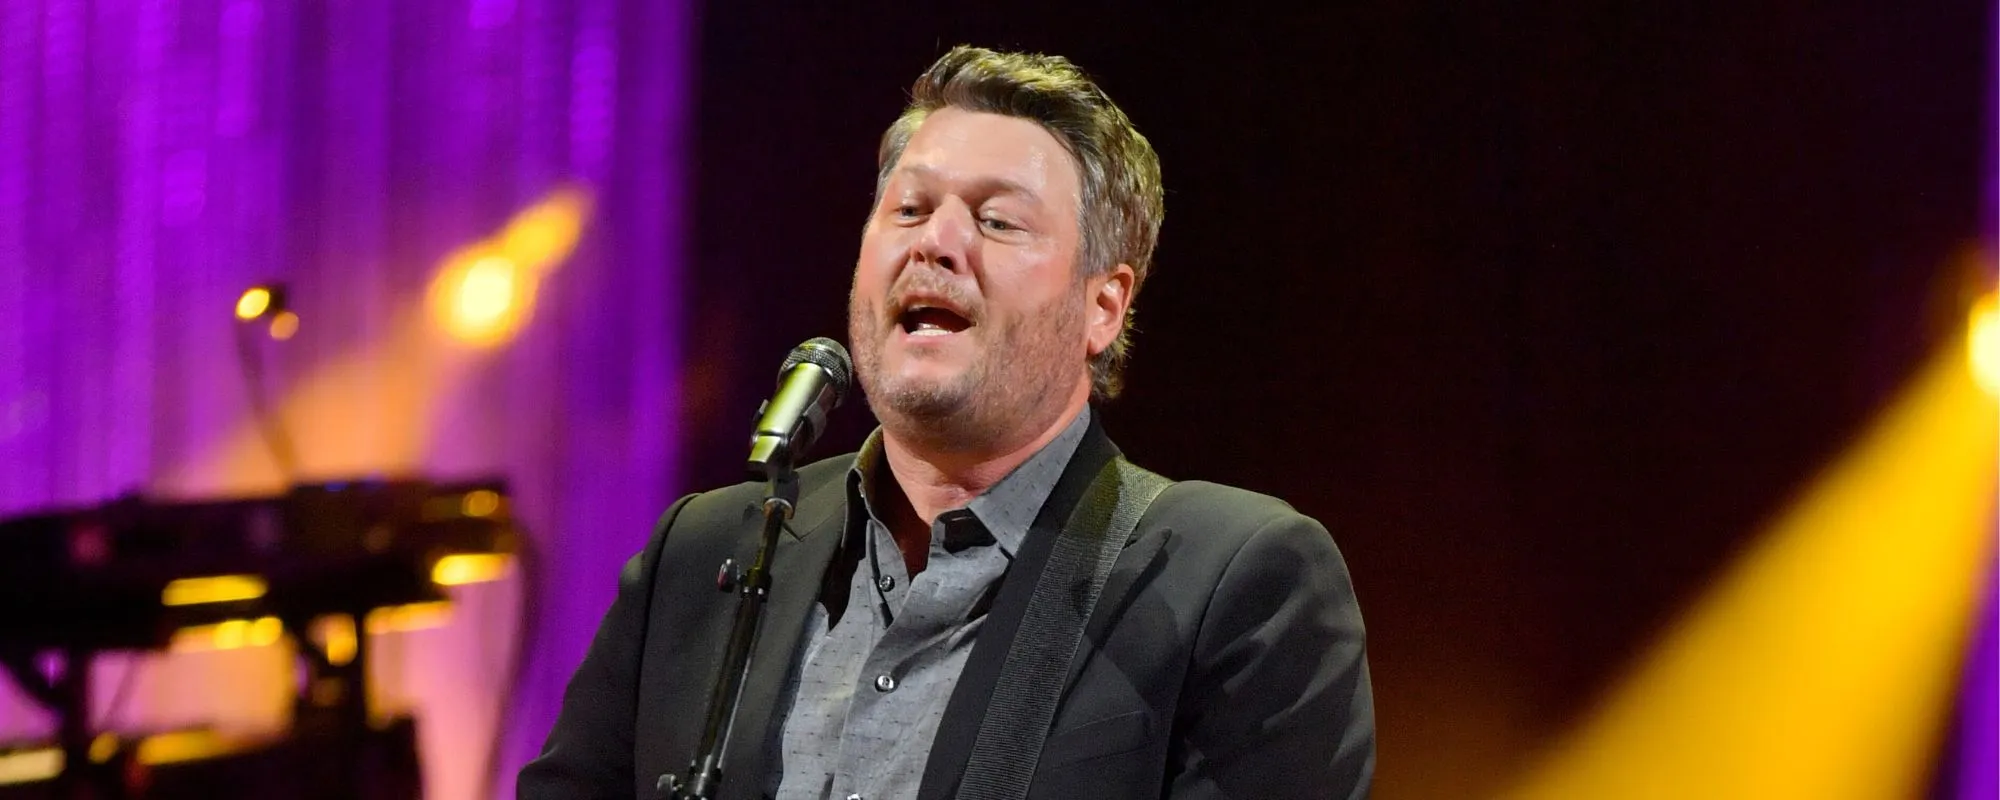 Is Blake Shelton Planning a Return to ‘The Voice’?